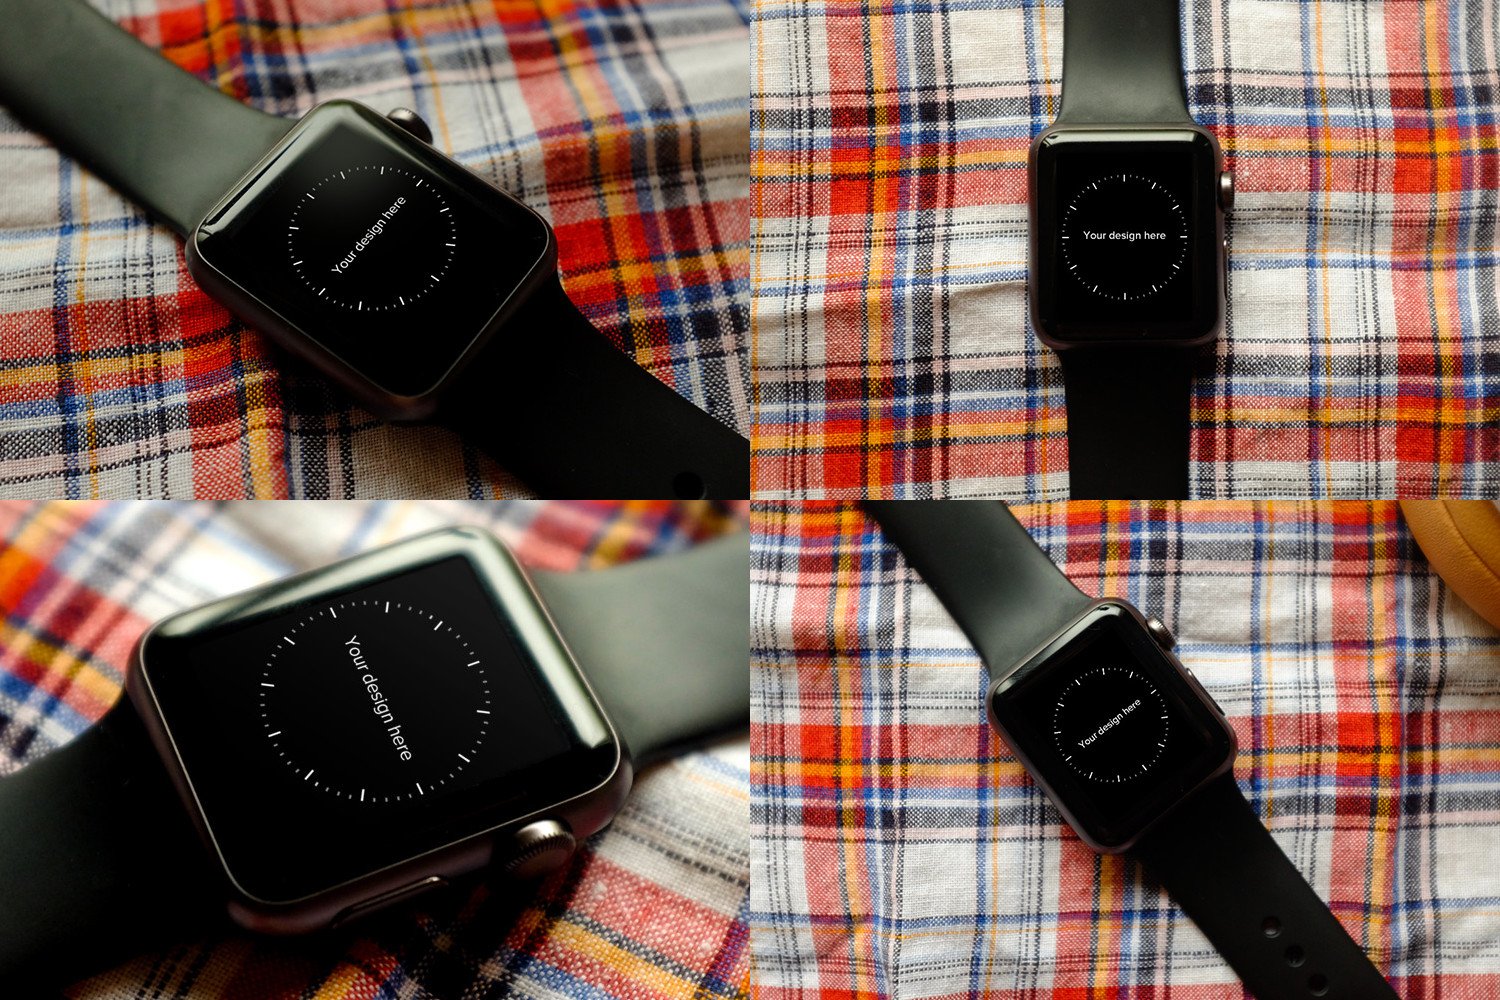 4 Apple Watch Mockups 2 cover image.